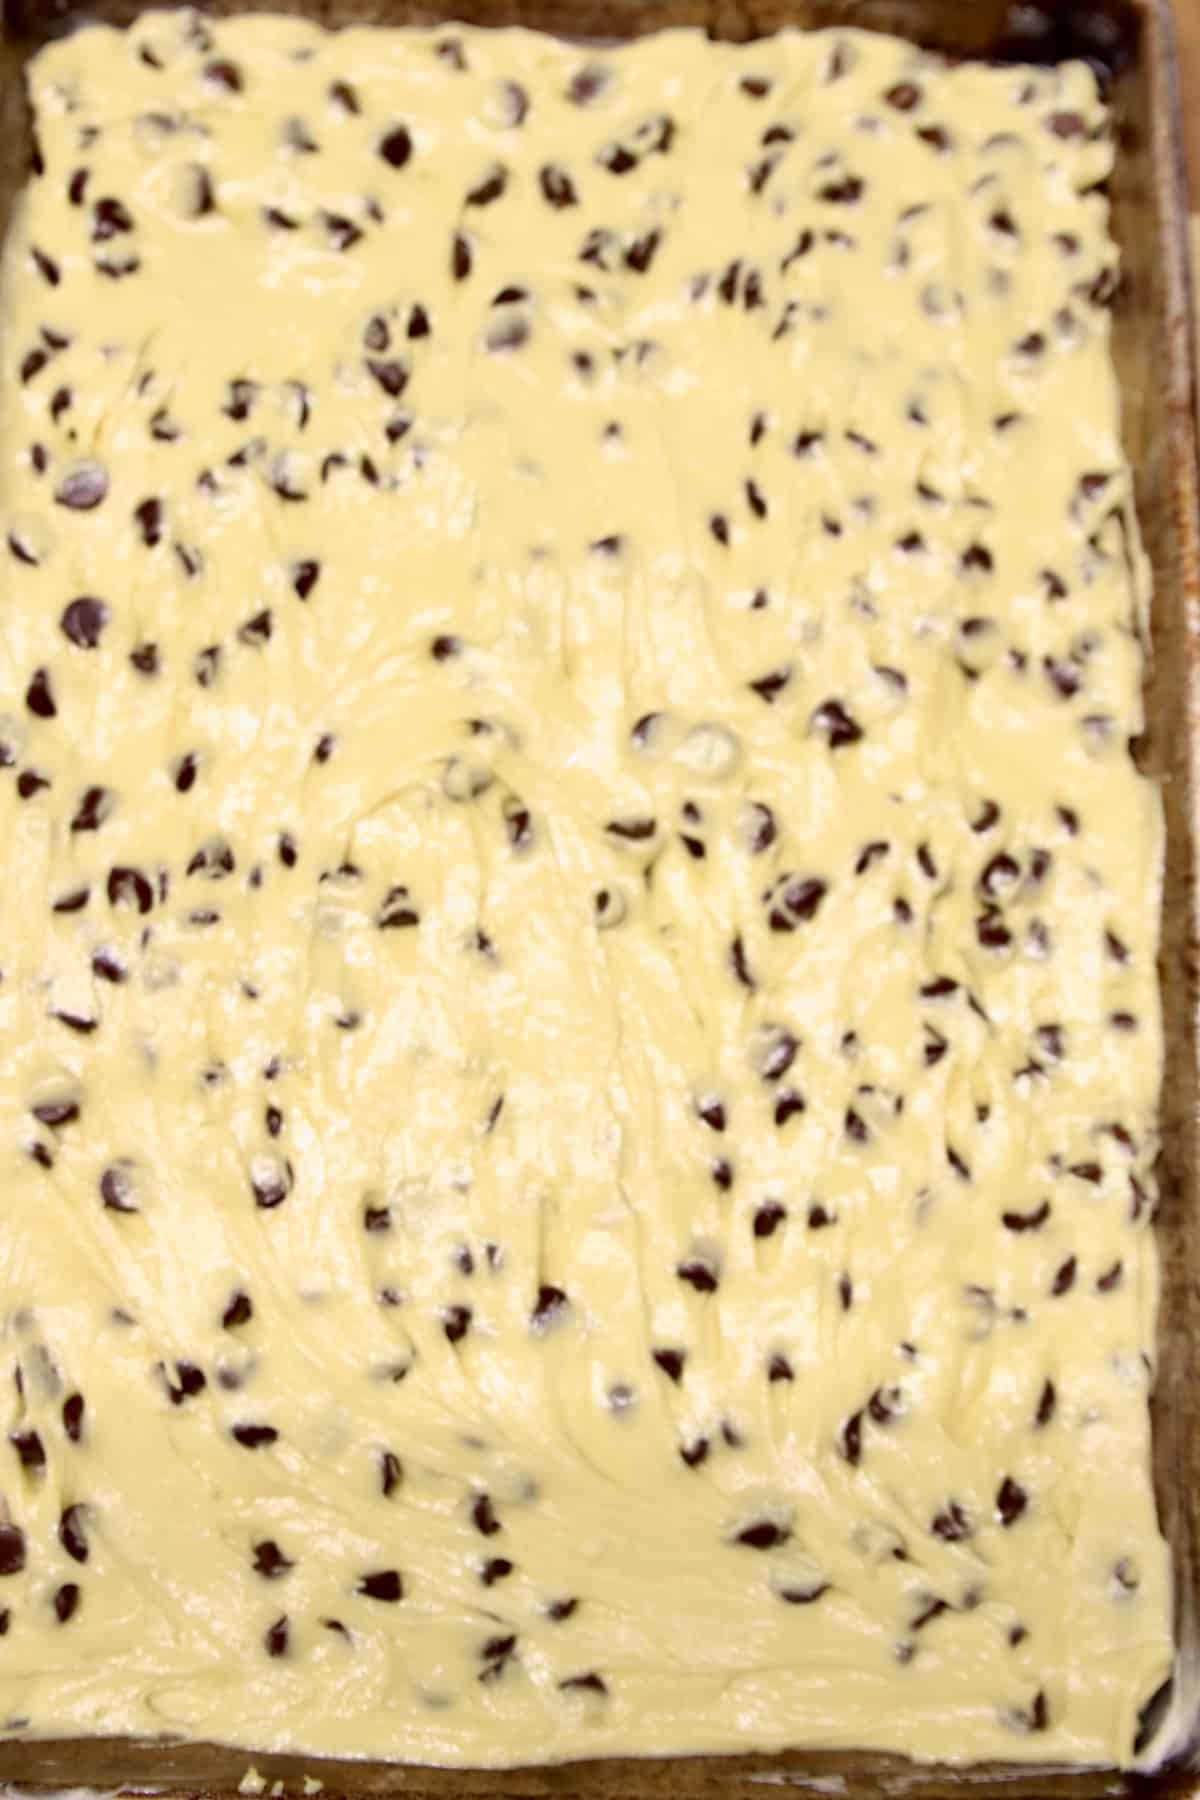 Chocolate chip bars in a pan ready to bake.